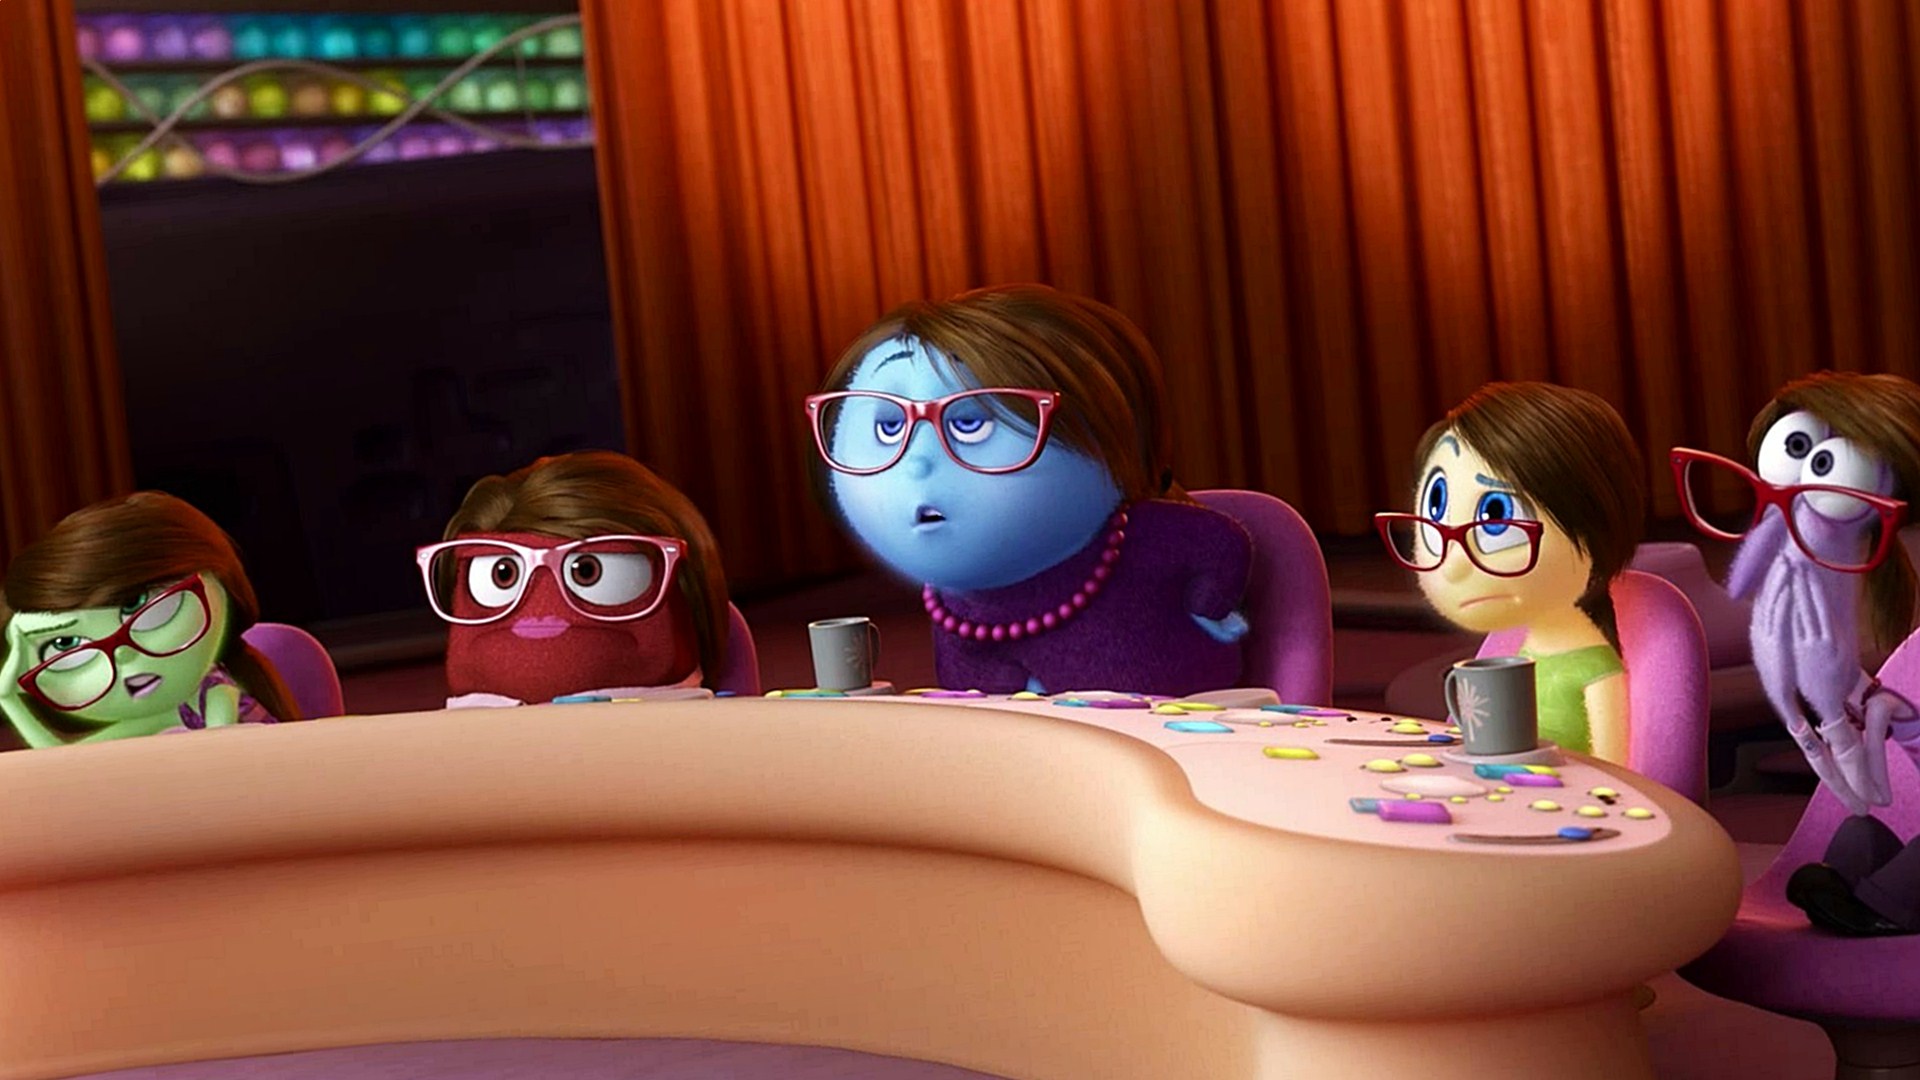 Inside Out Movie Pictures Download Free Desktop Wallpaper Images